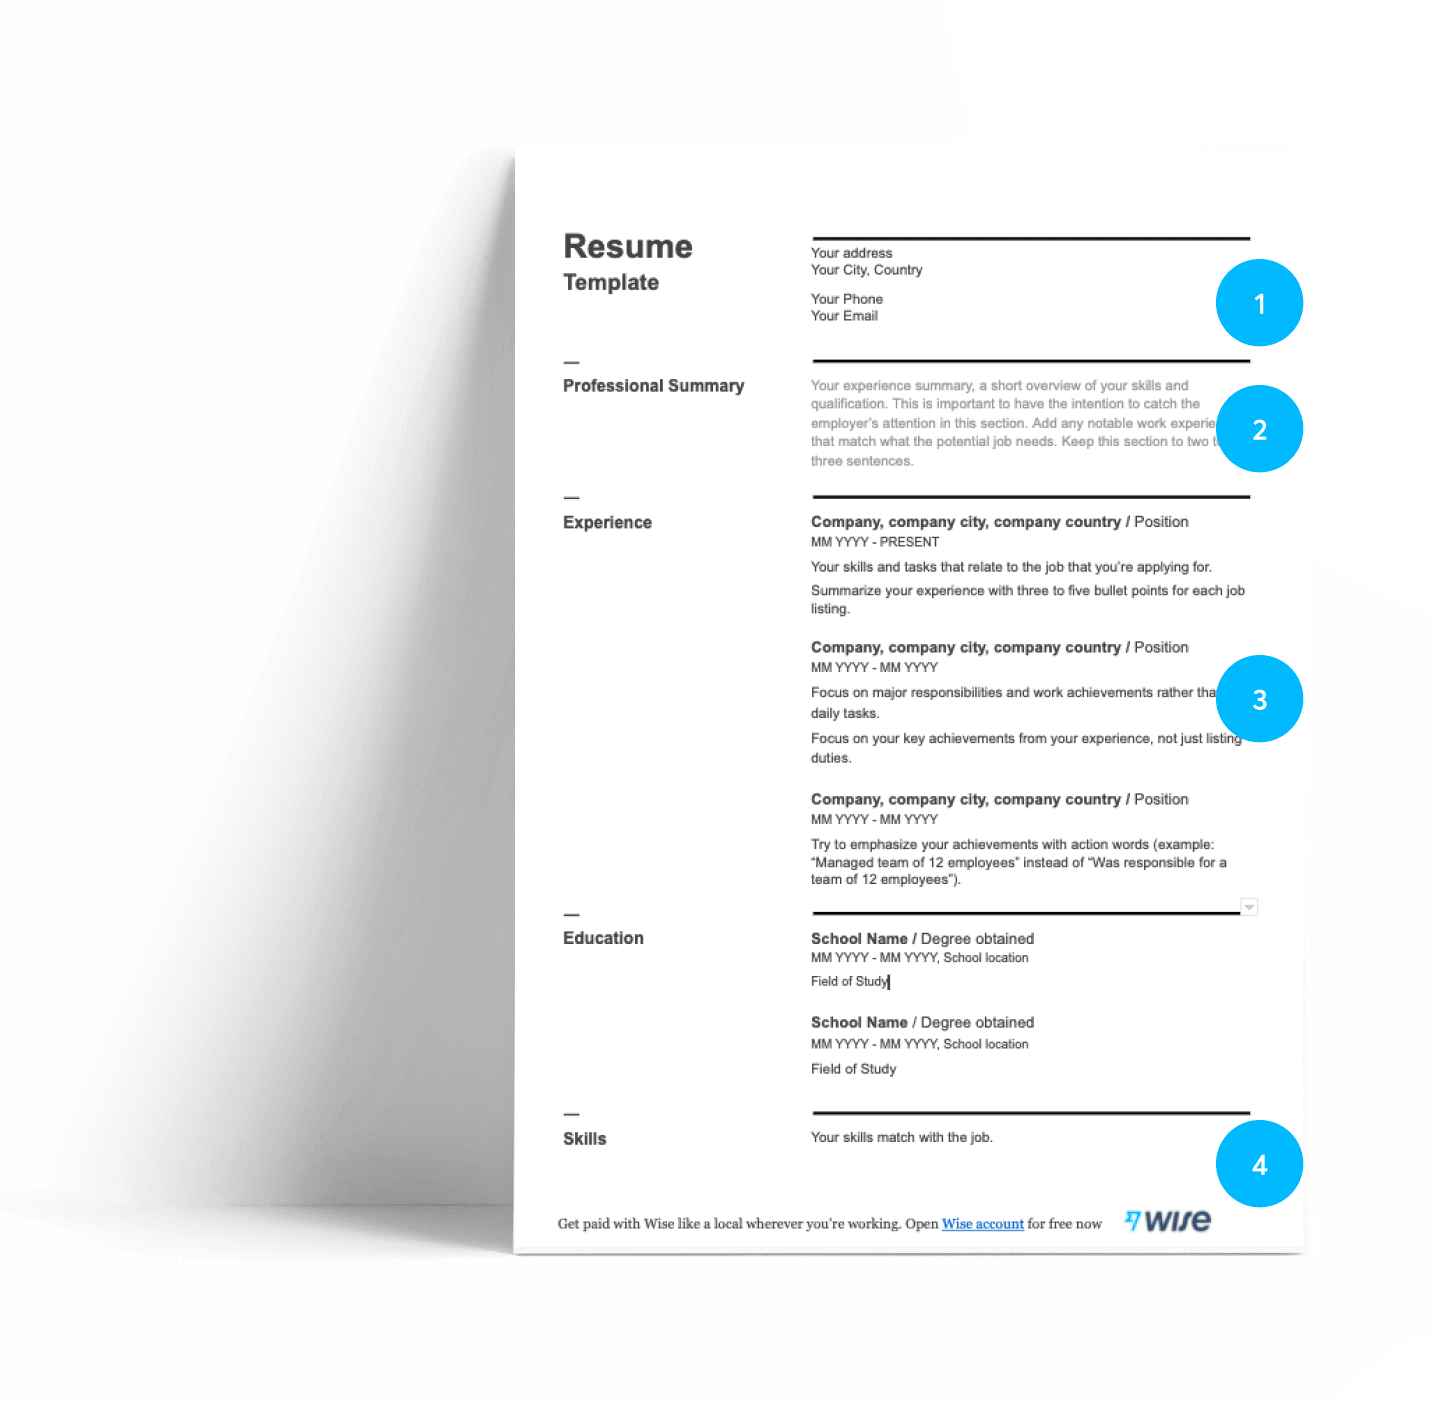 How to write a a medical resume?